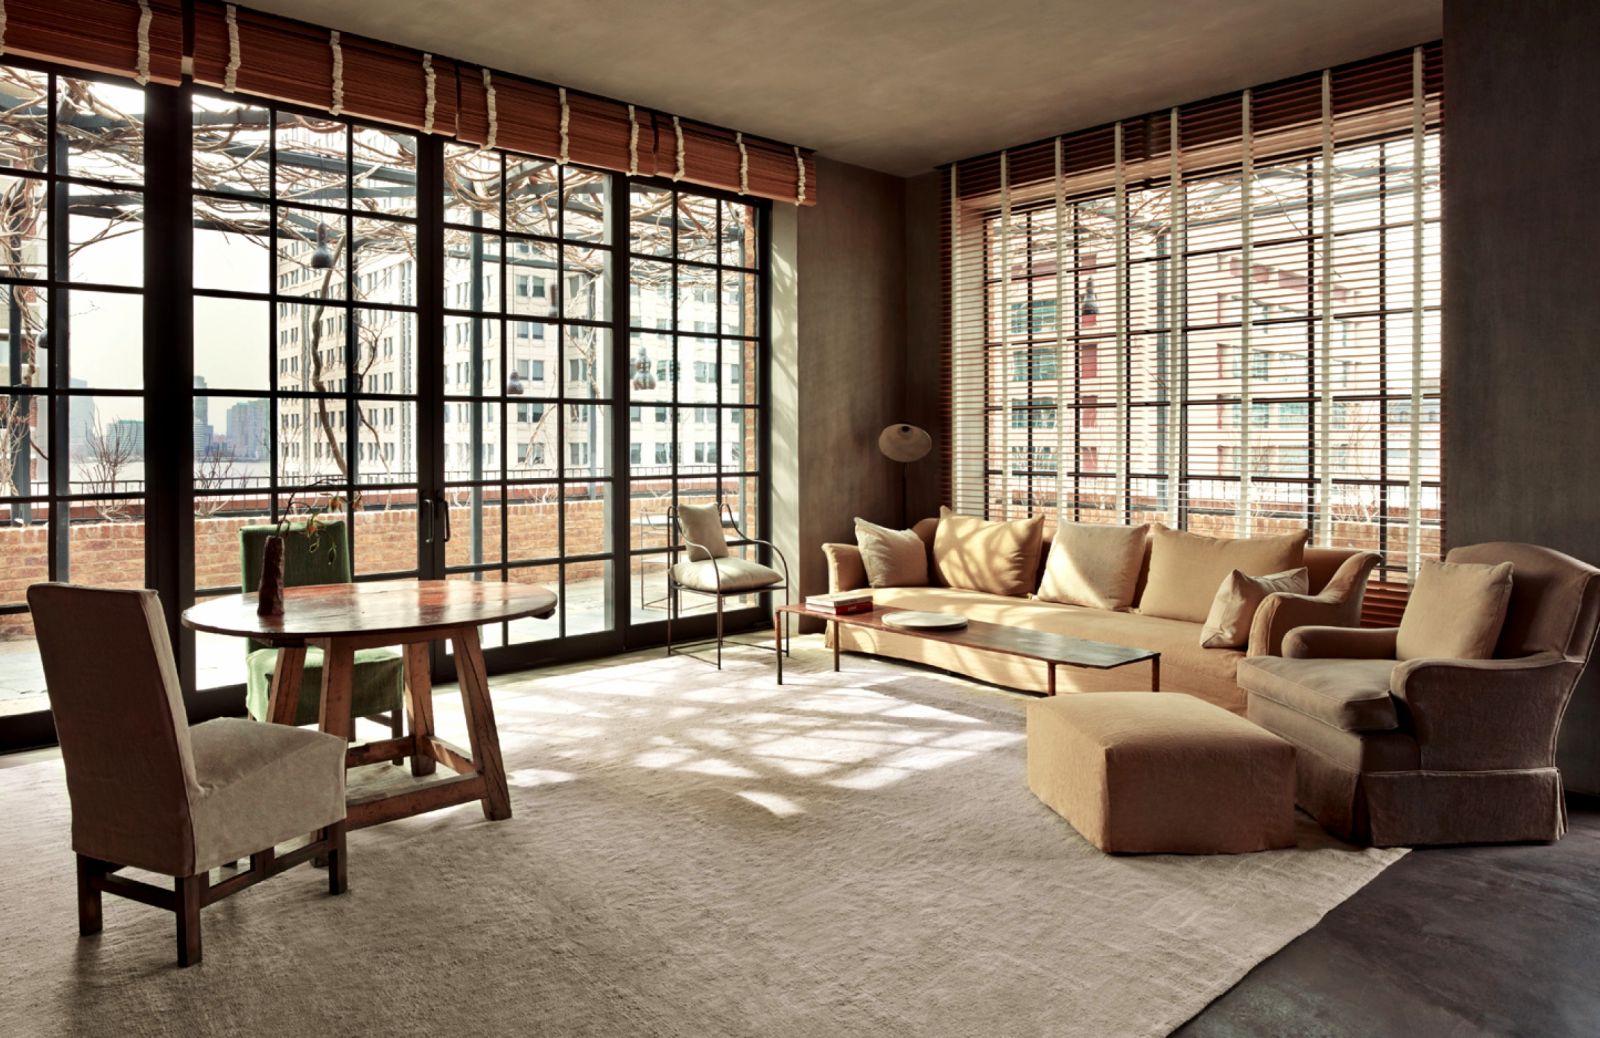 Fabulous Penthouse Suite at The Greenwich Hotel, NYC by Axel Vervoordt